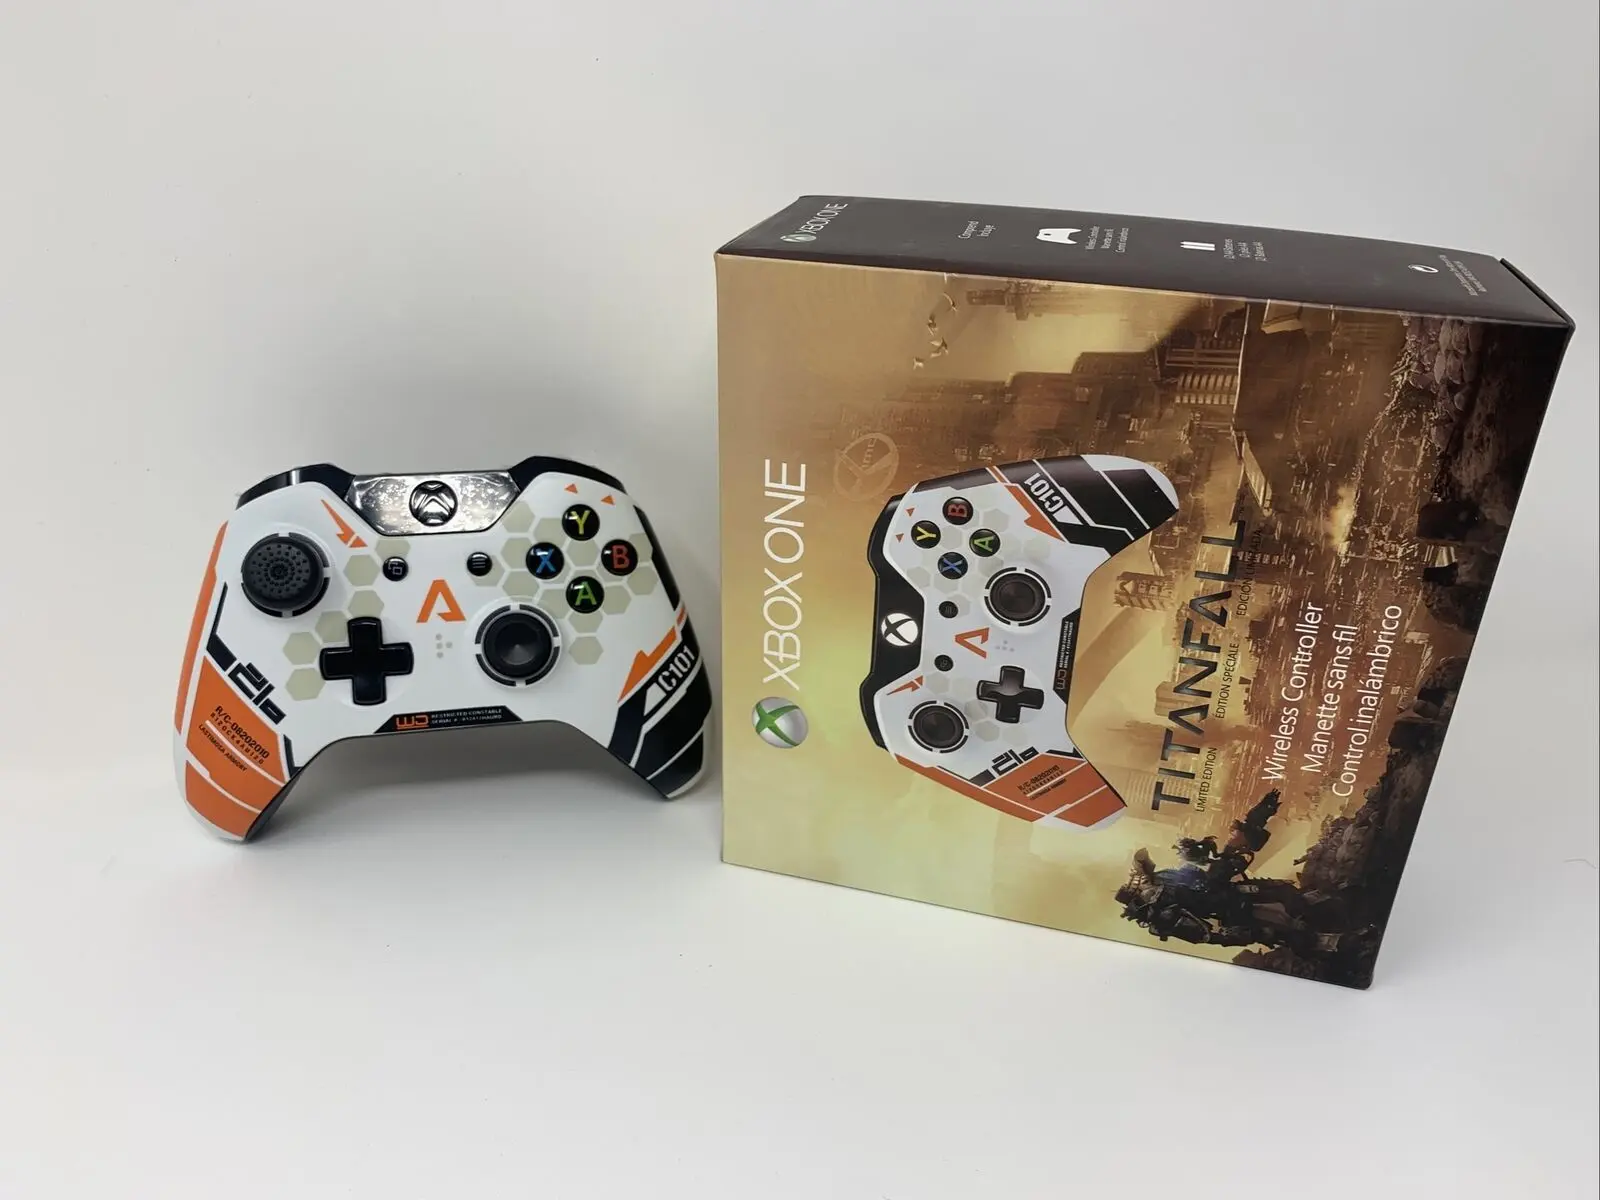 Titanfall Limited Edition Xbox One Wireless Controller: A Must-Have for Gamers